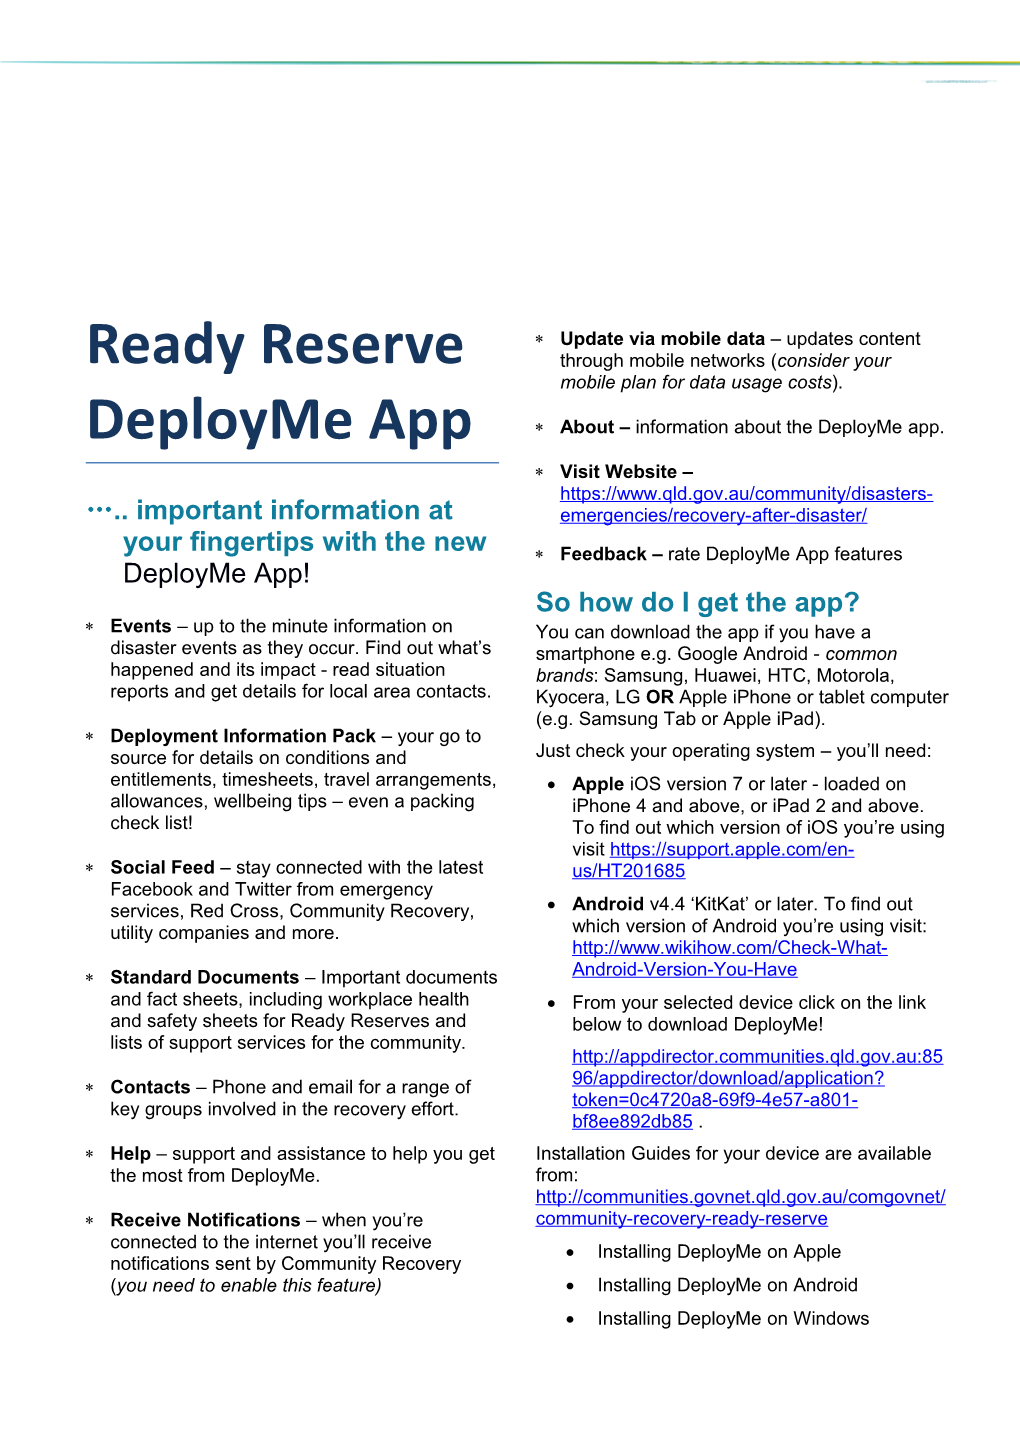 Deployme App Quick Reference Guide